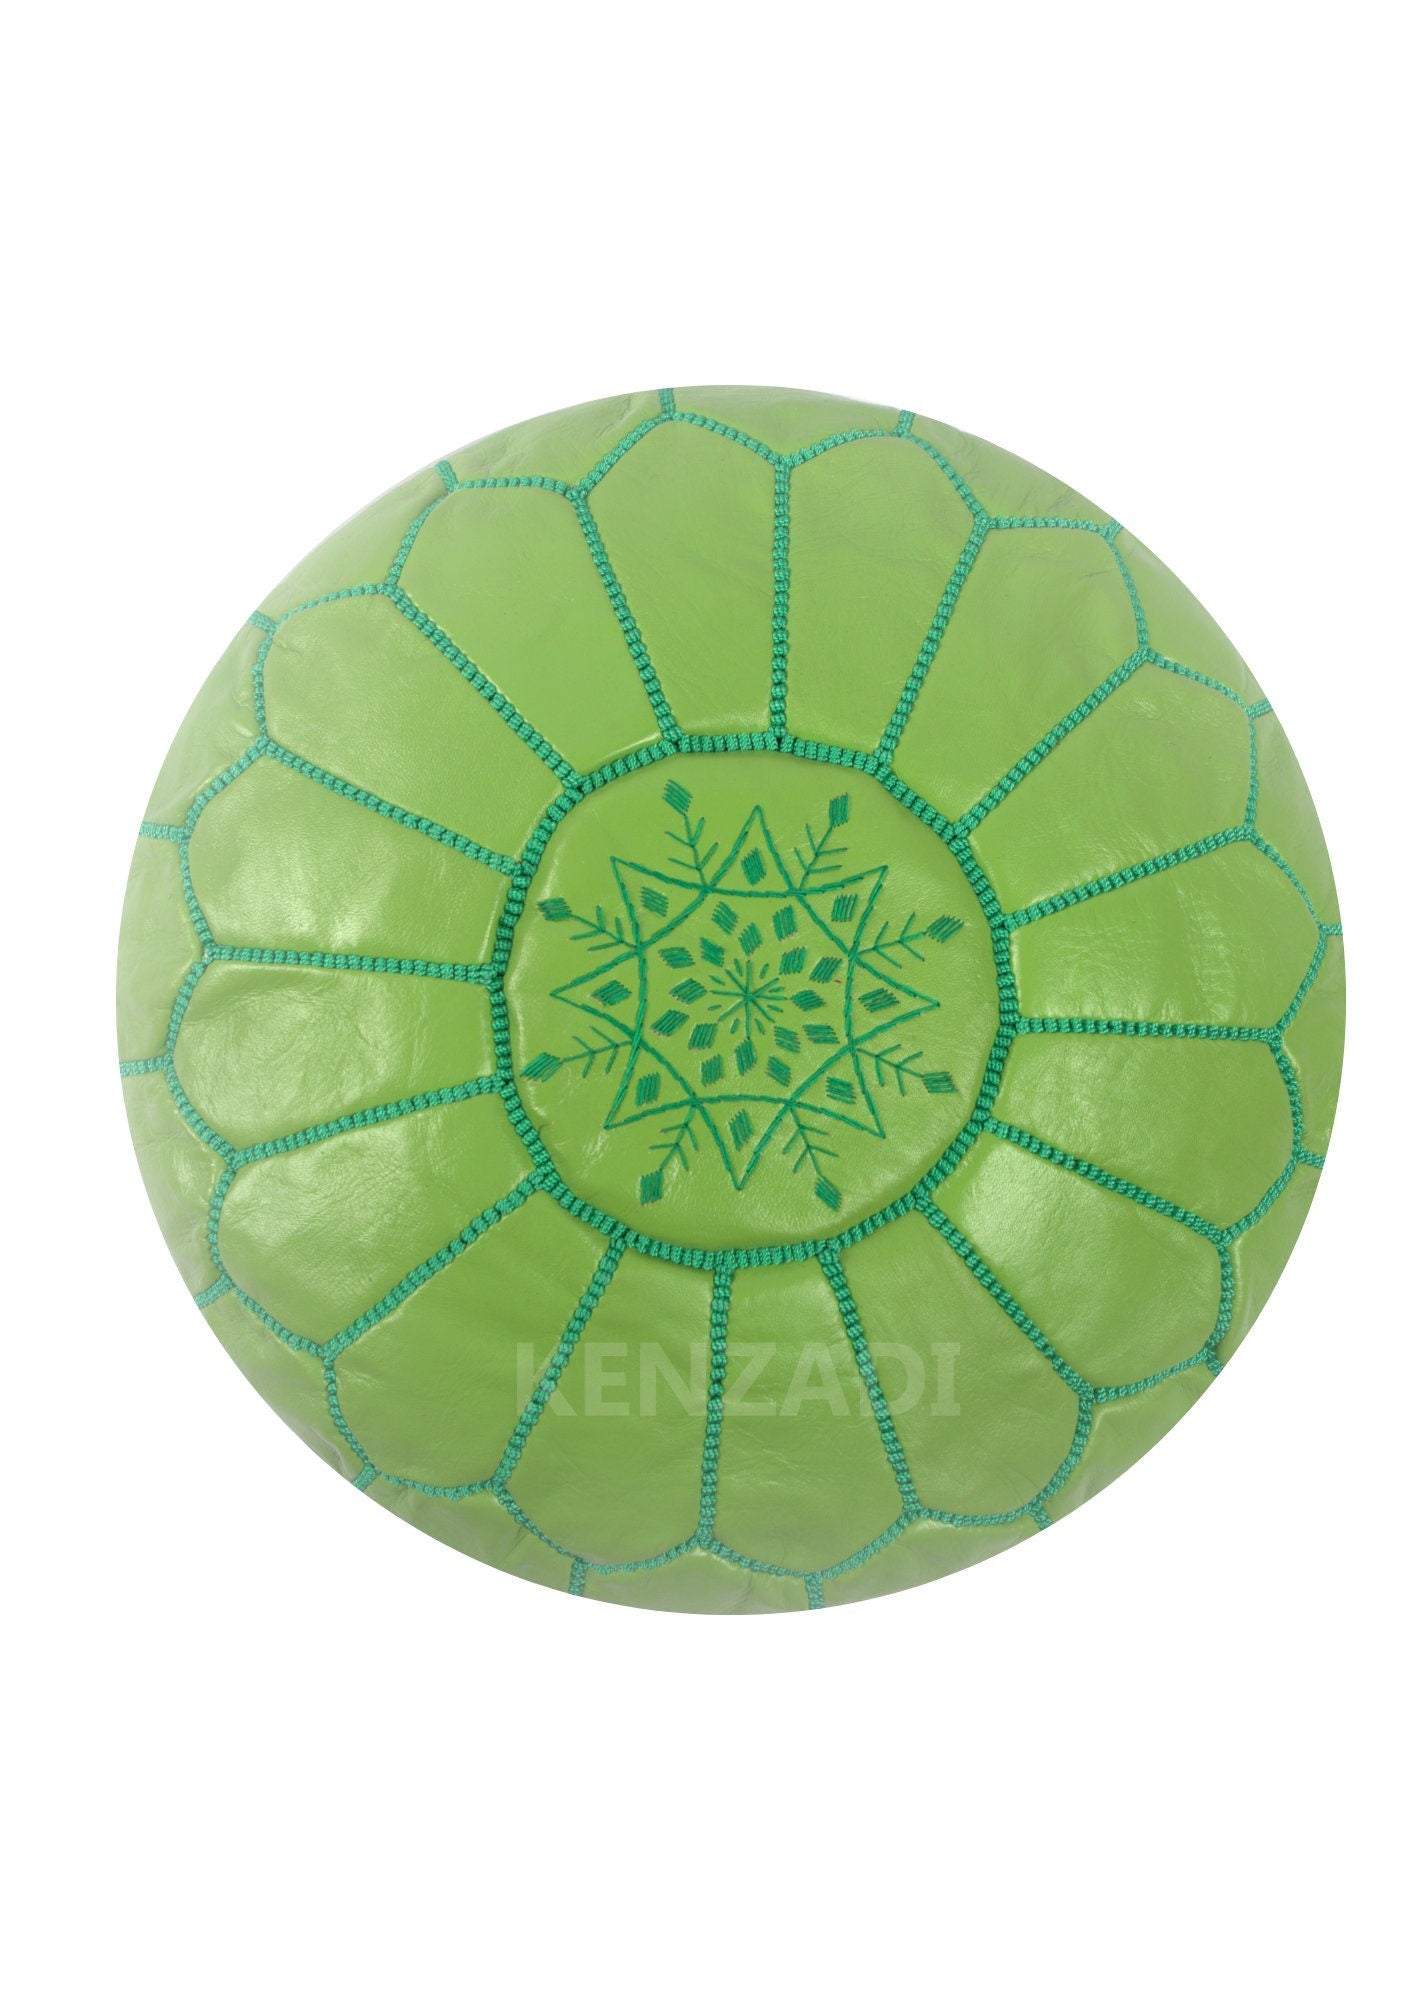 Authentic Moroccan round leather pouf with light green and green embroidery